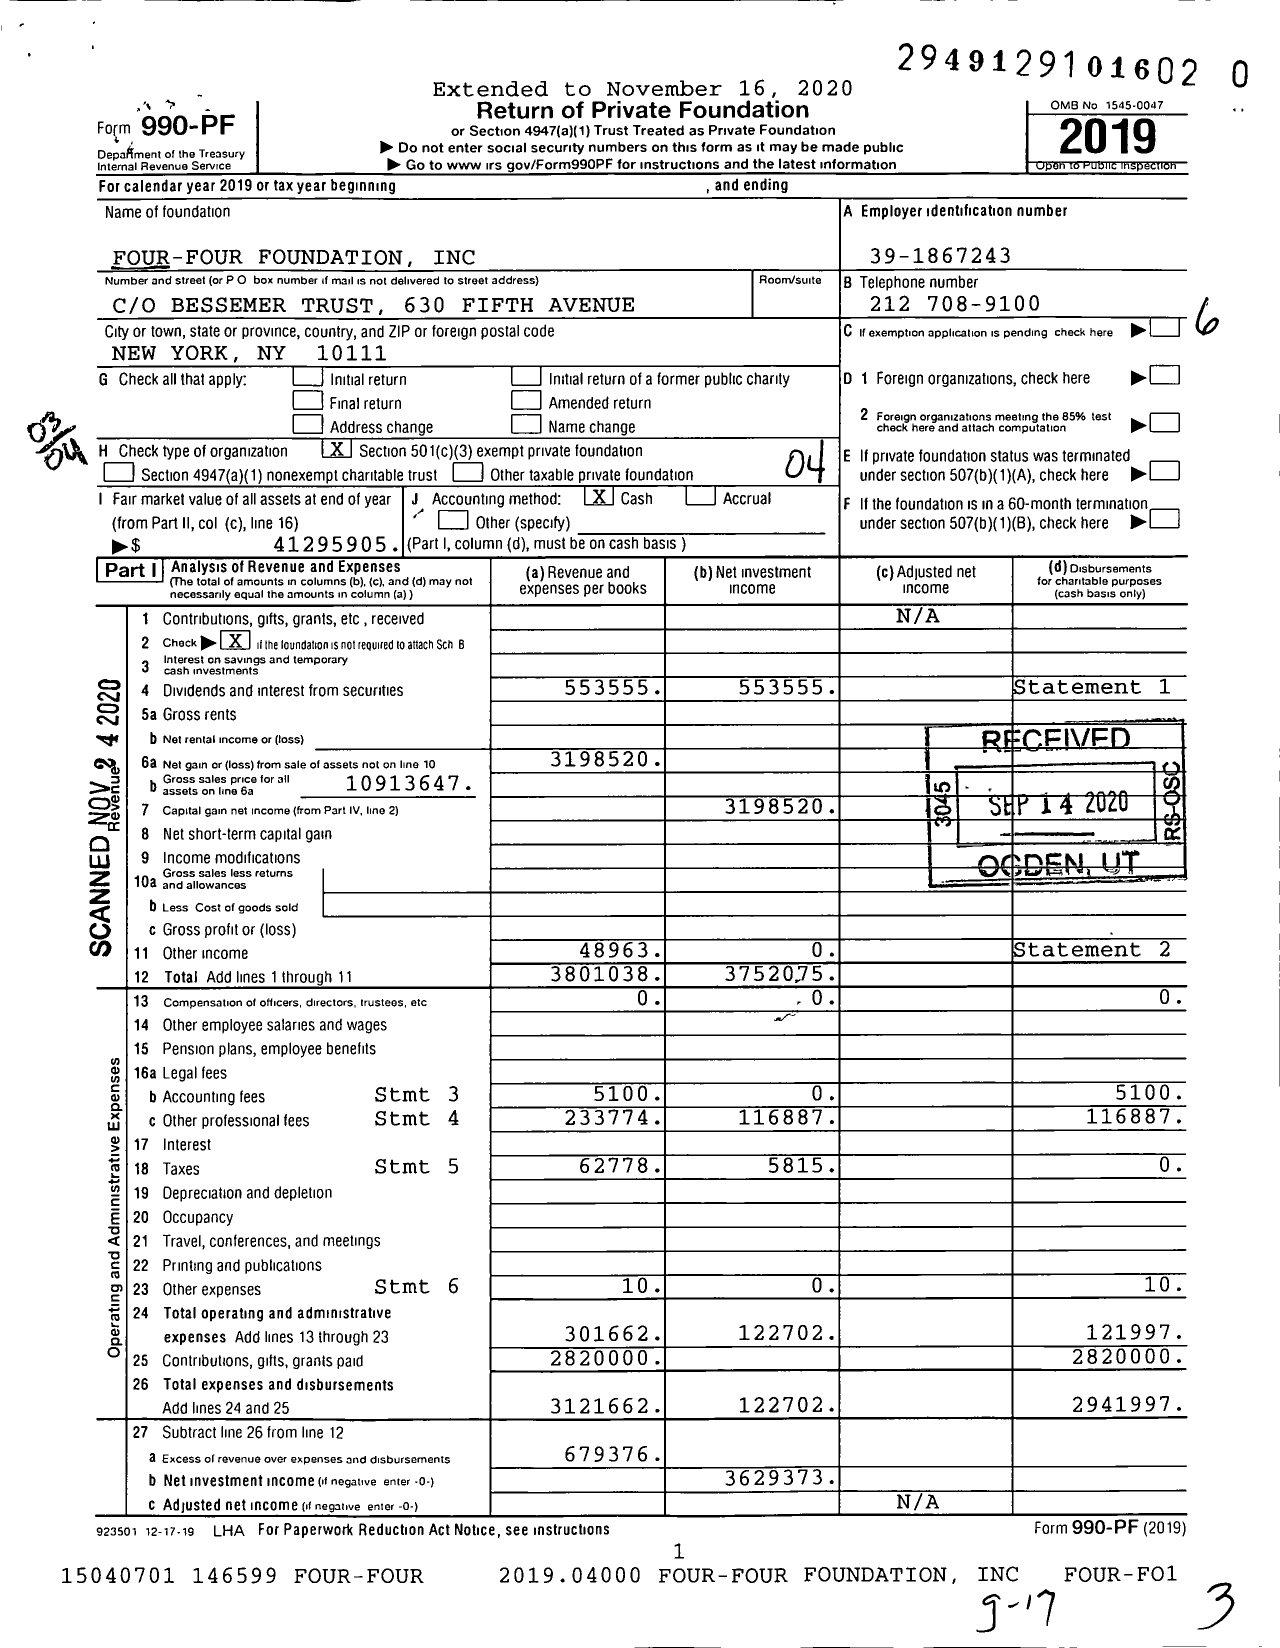 Image of first page of 2019 Form 990PF for Four-Four Foundation